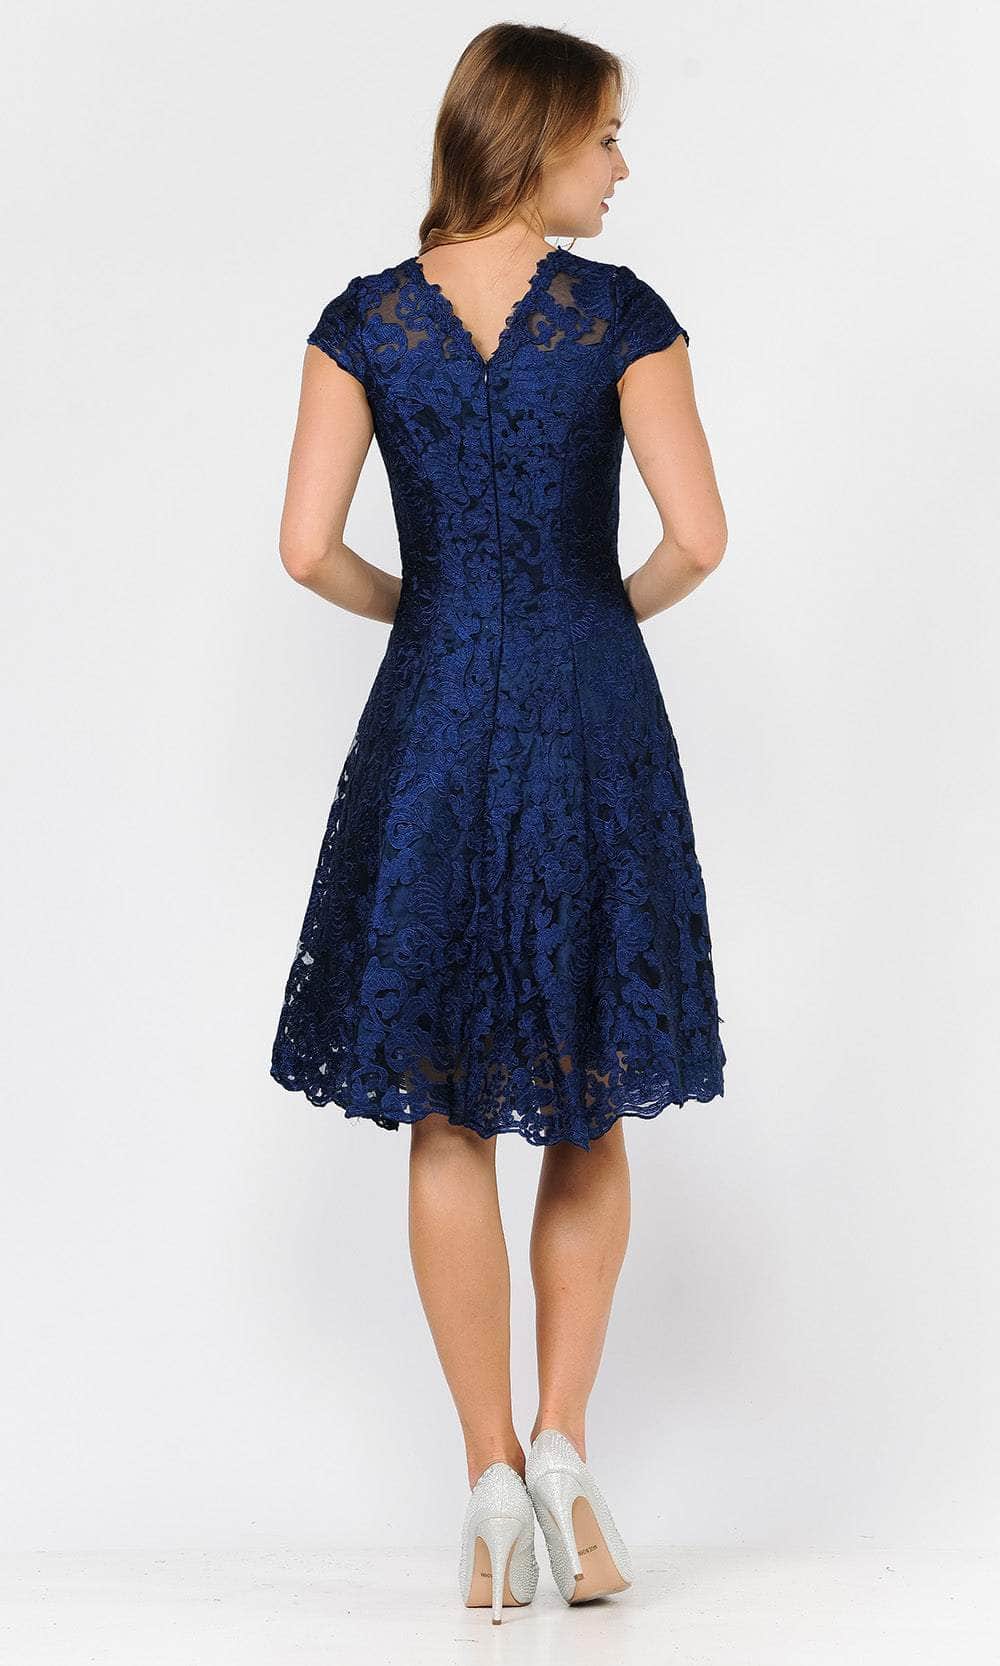 Poly USA 8090 - Lace Applique Short Sleeve Cocktail Dress Special Occasion Dresses